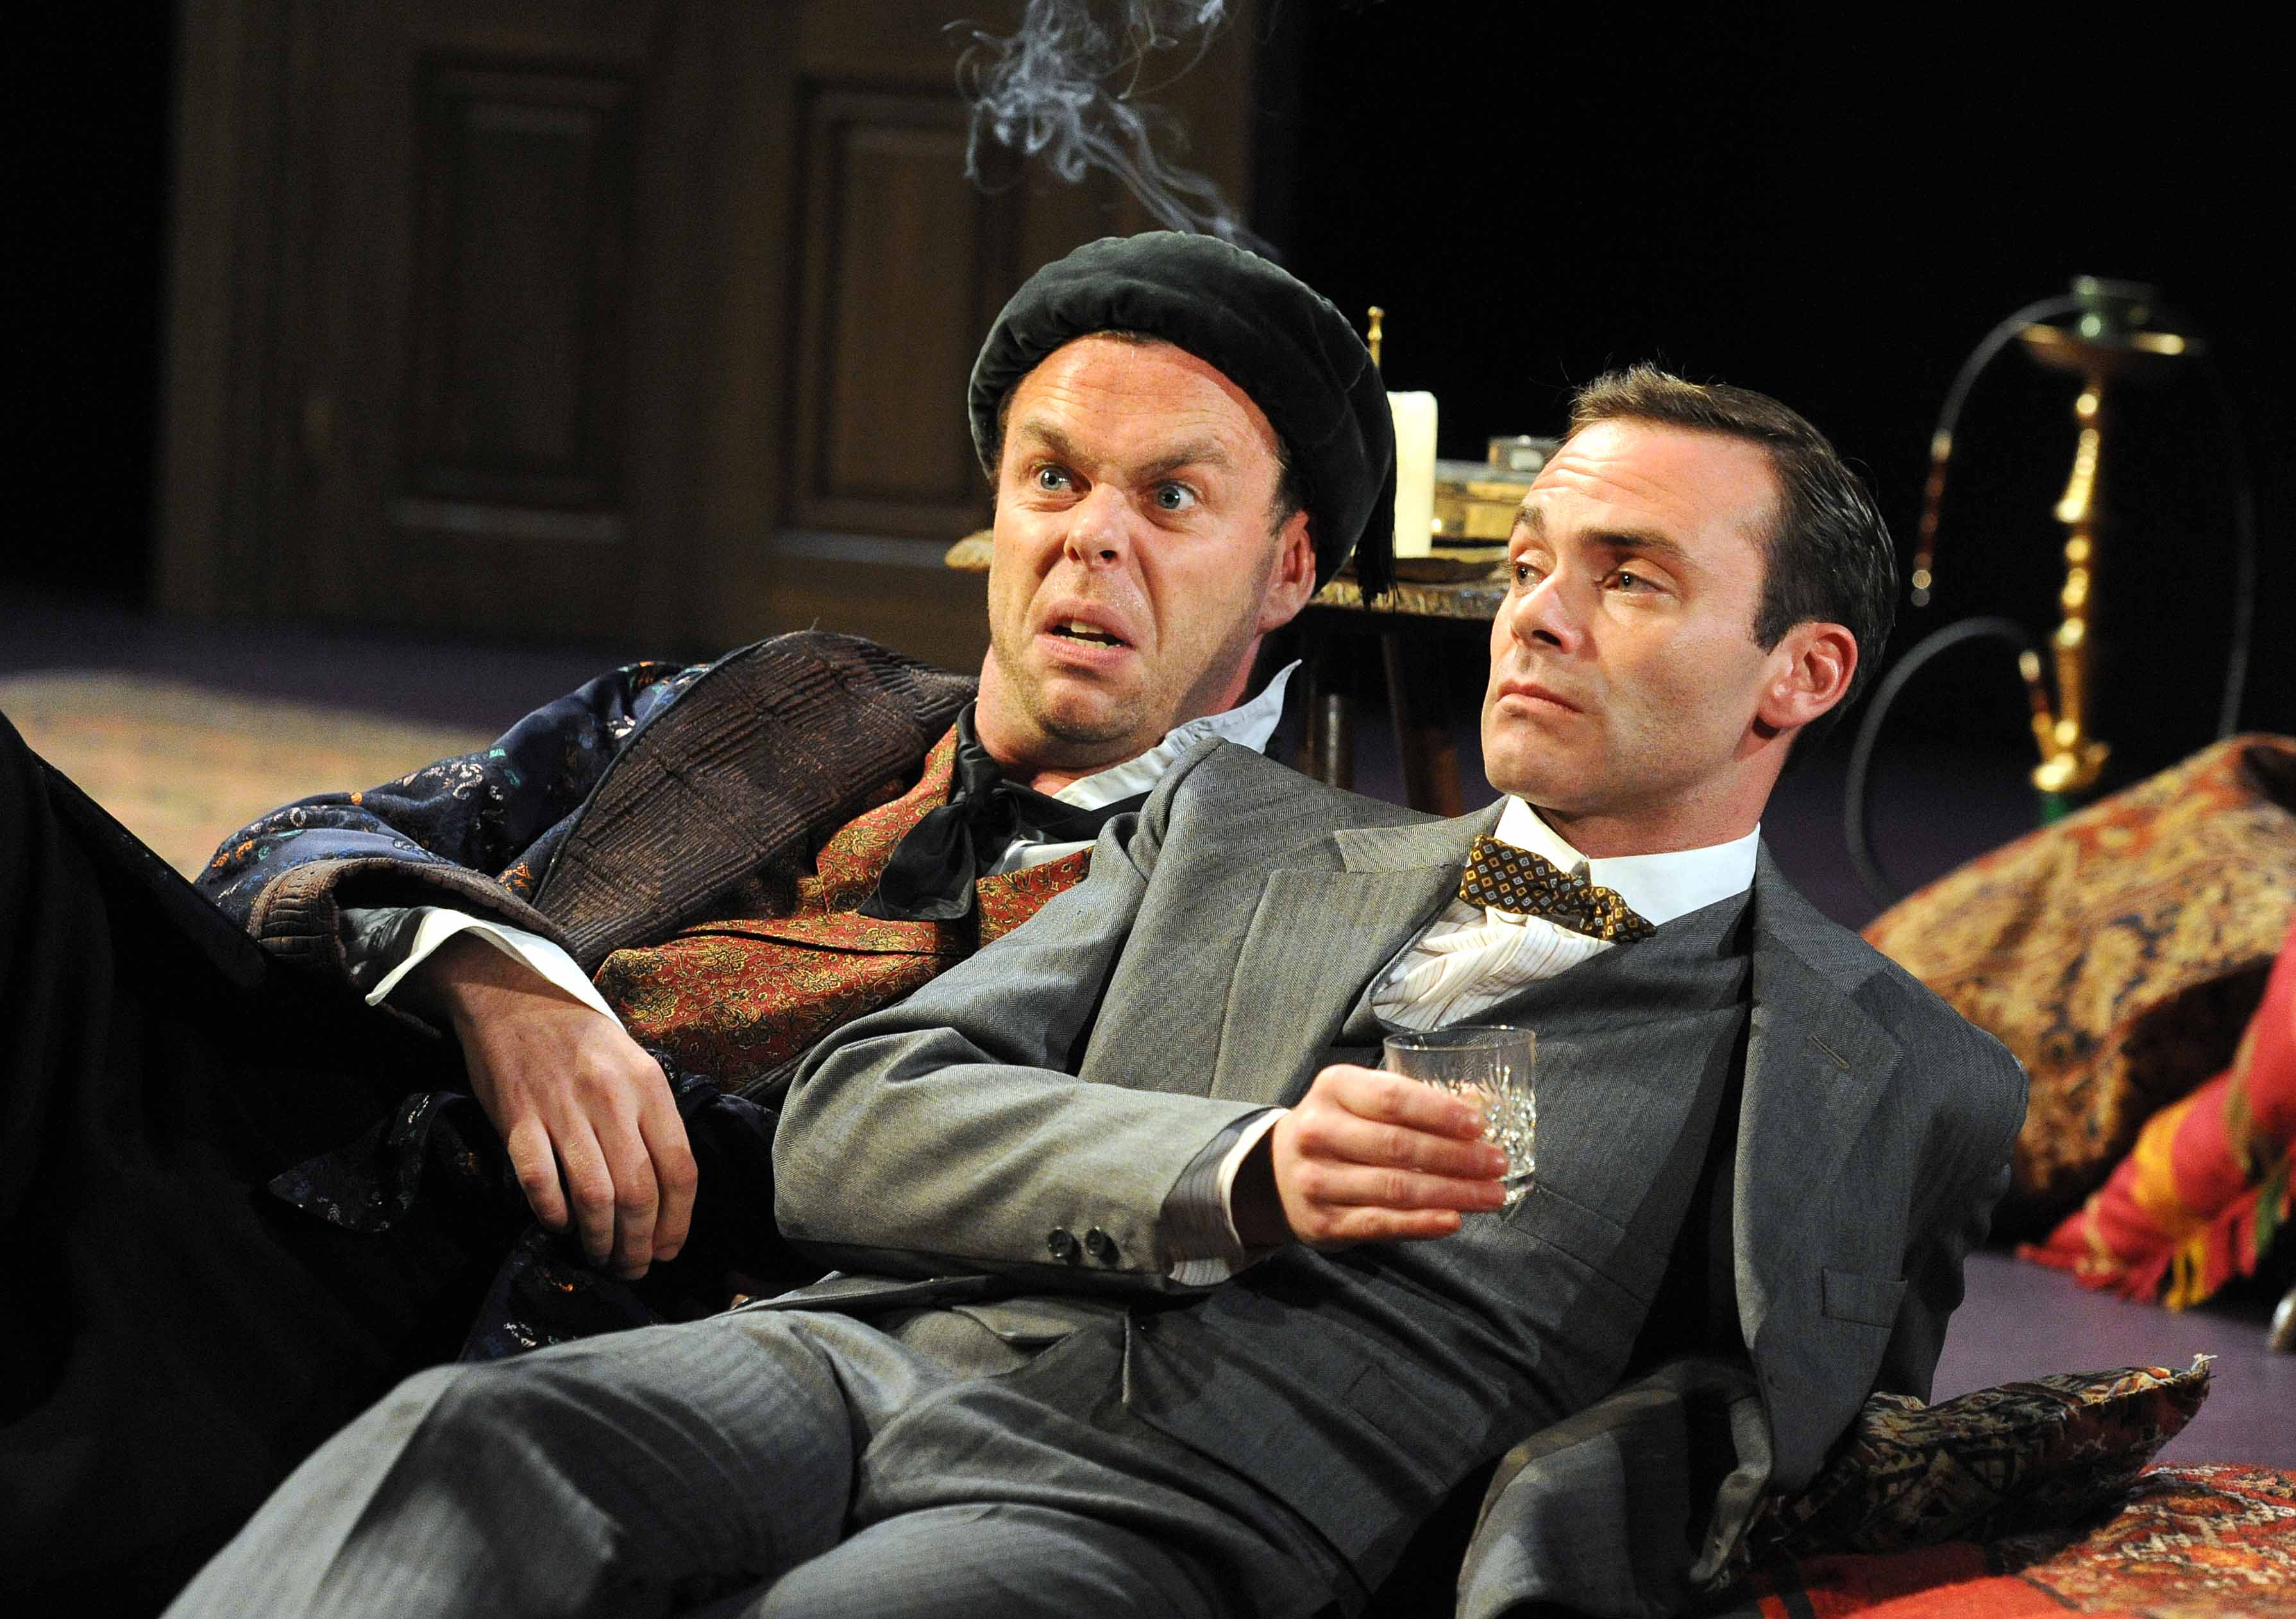 The Importance Of Being Earnest. The Rose Theatre, Kingston.